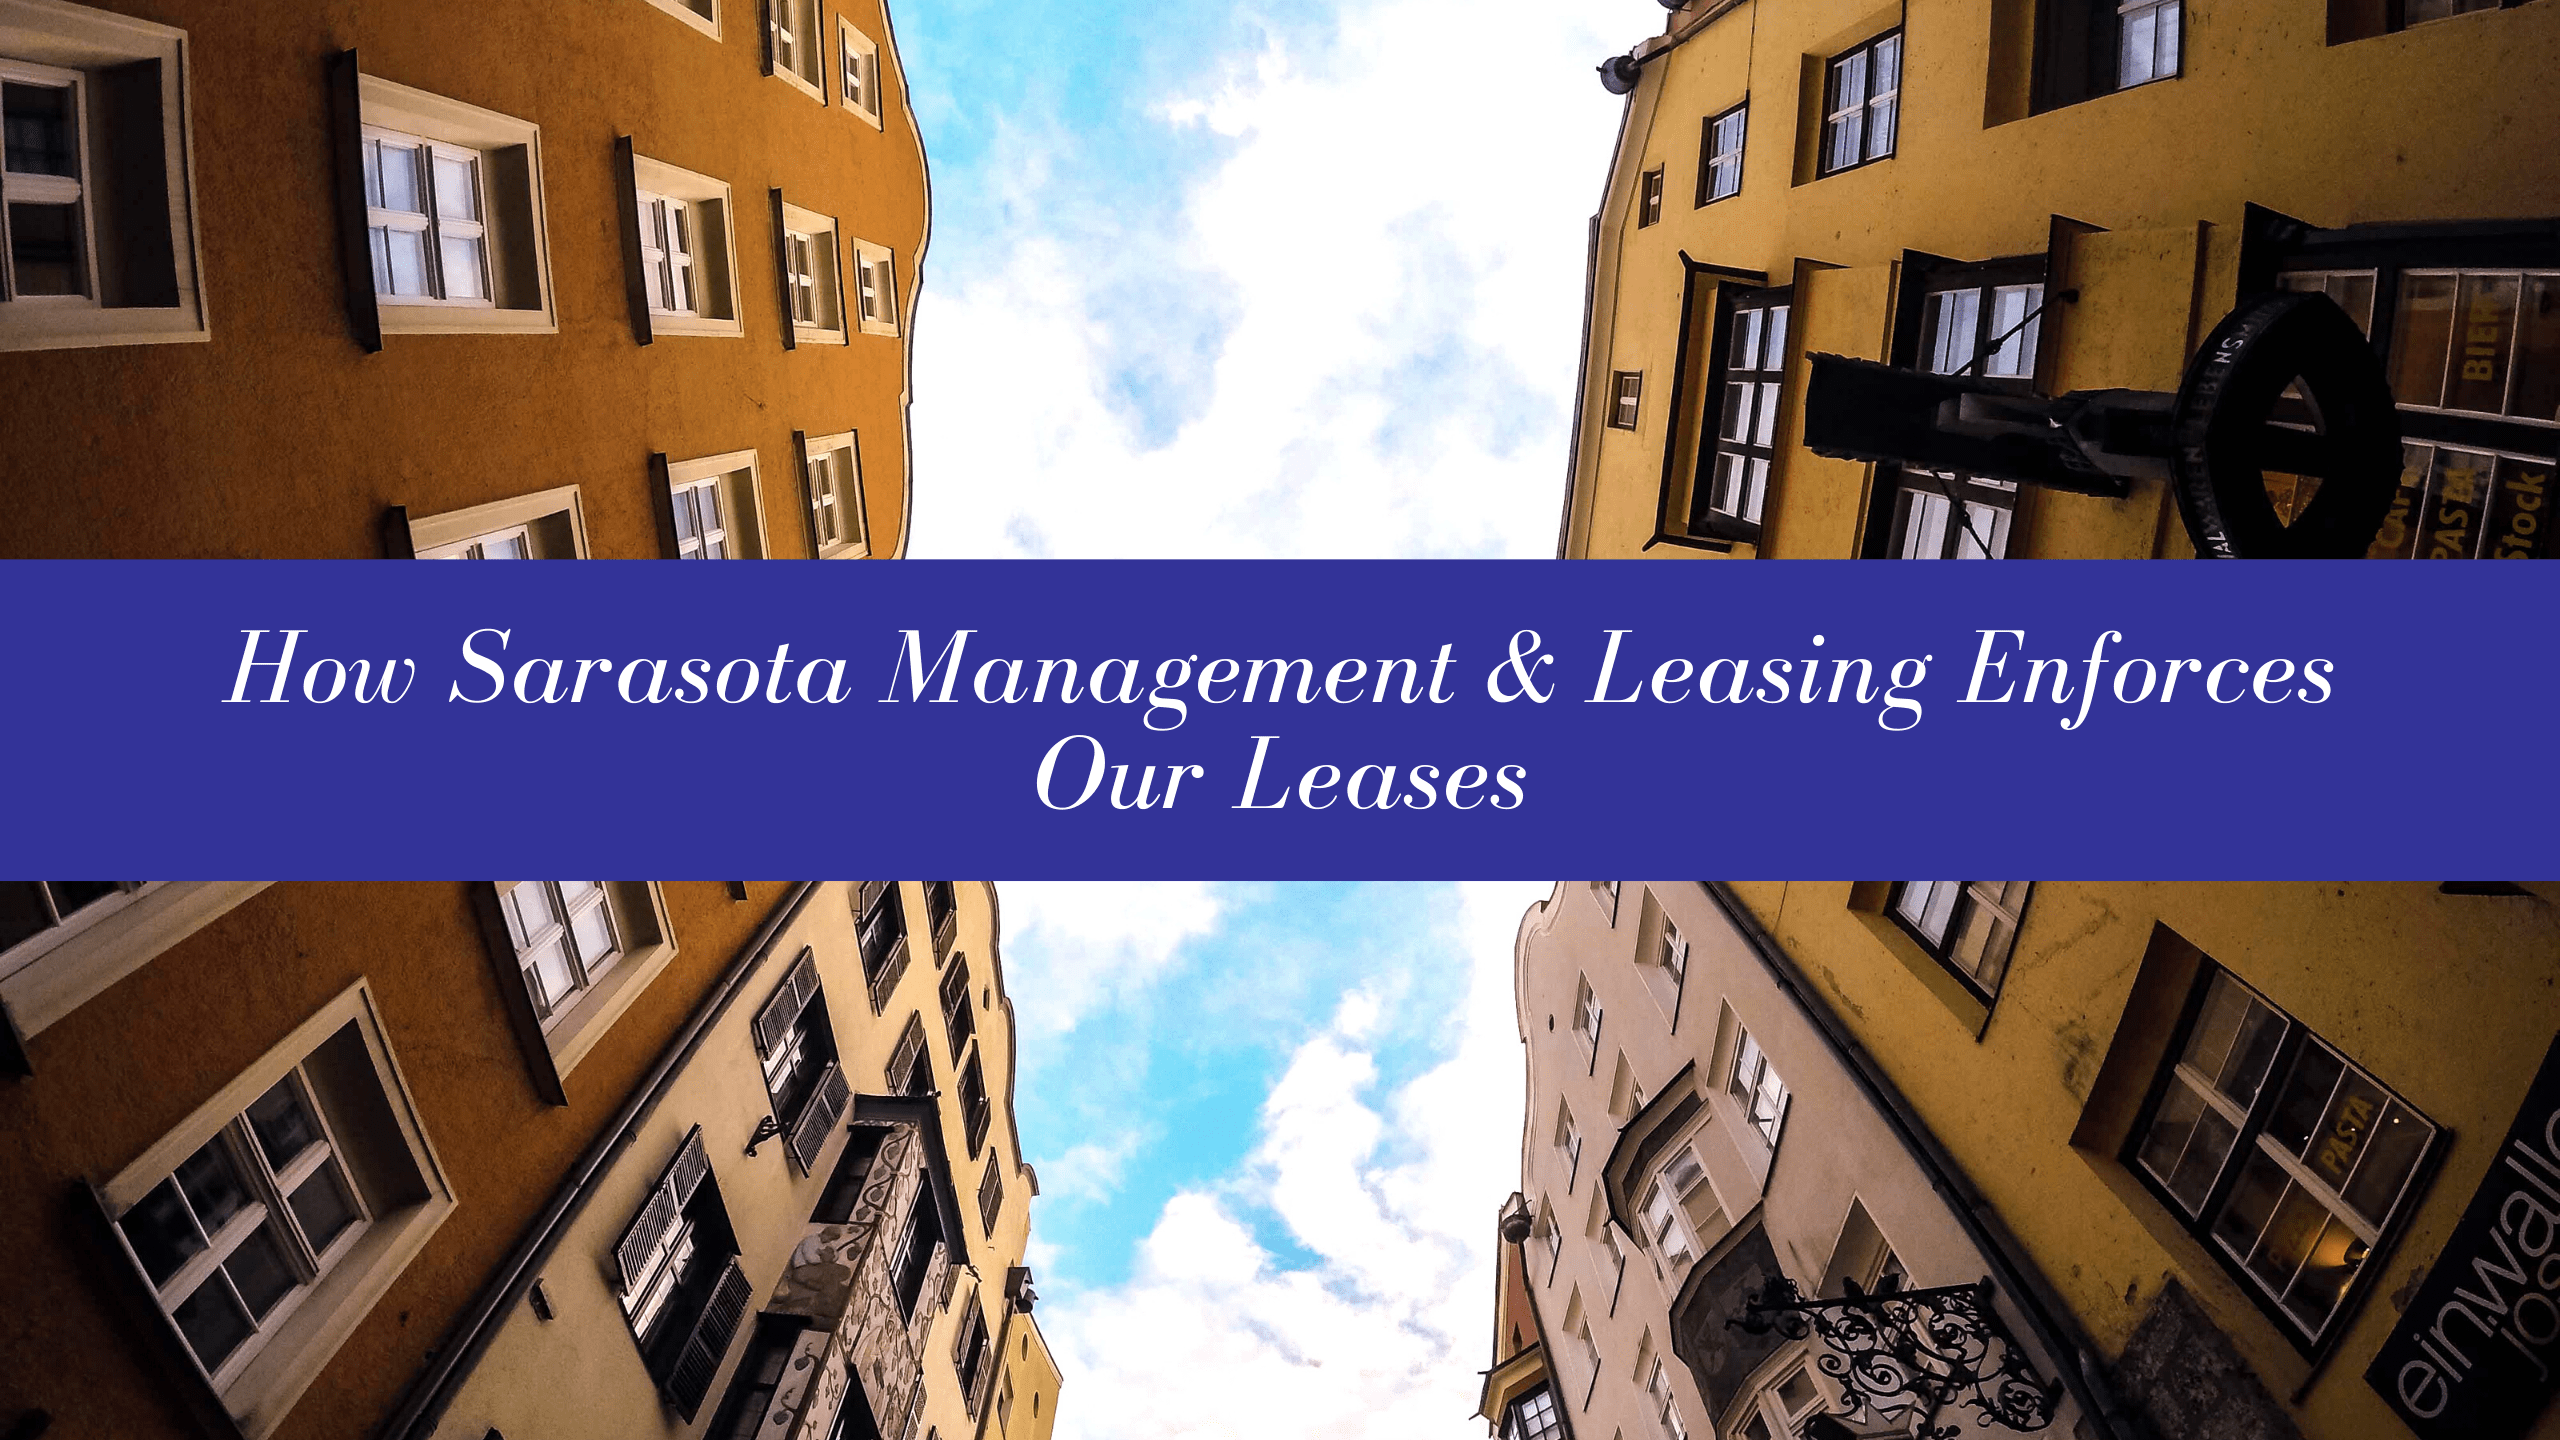 How Sarasota Management & Leasing Enforces Our Leases